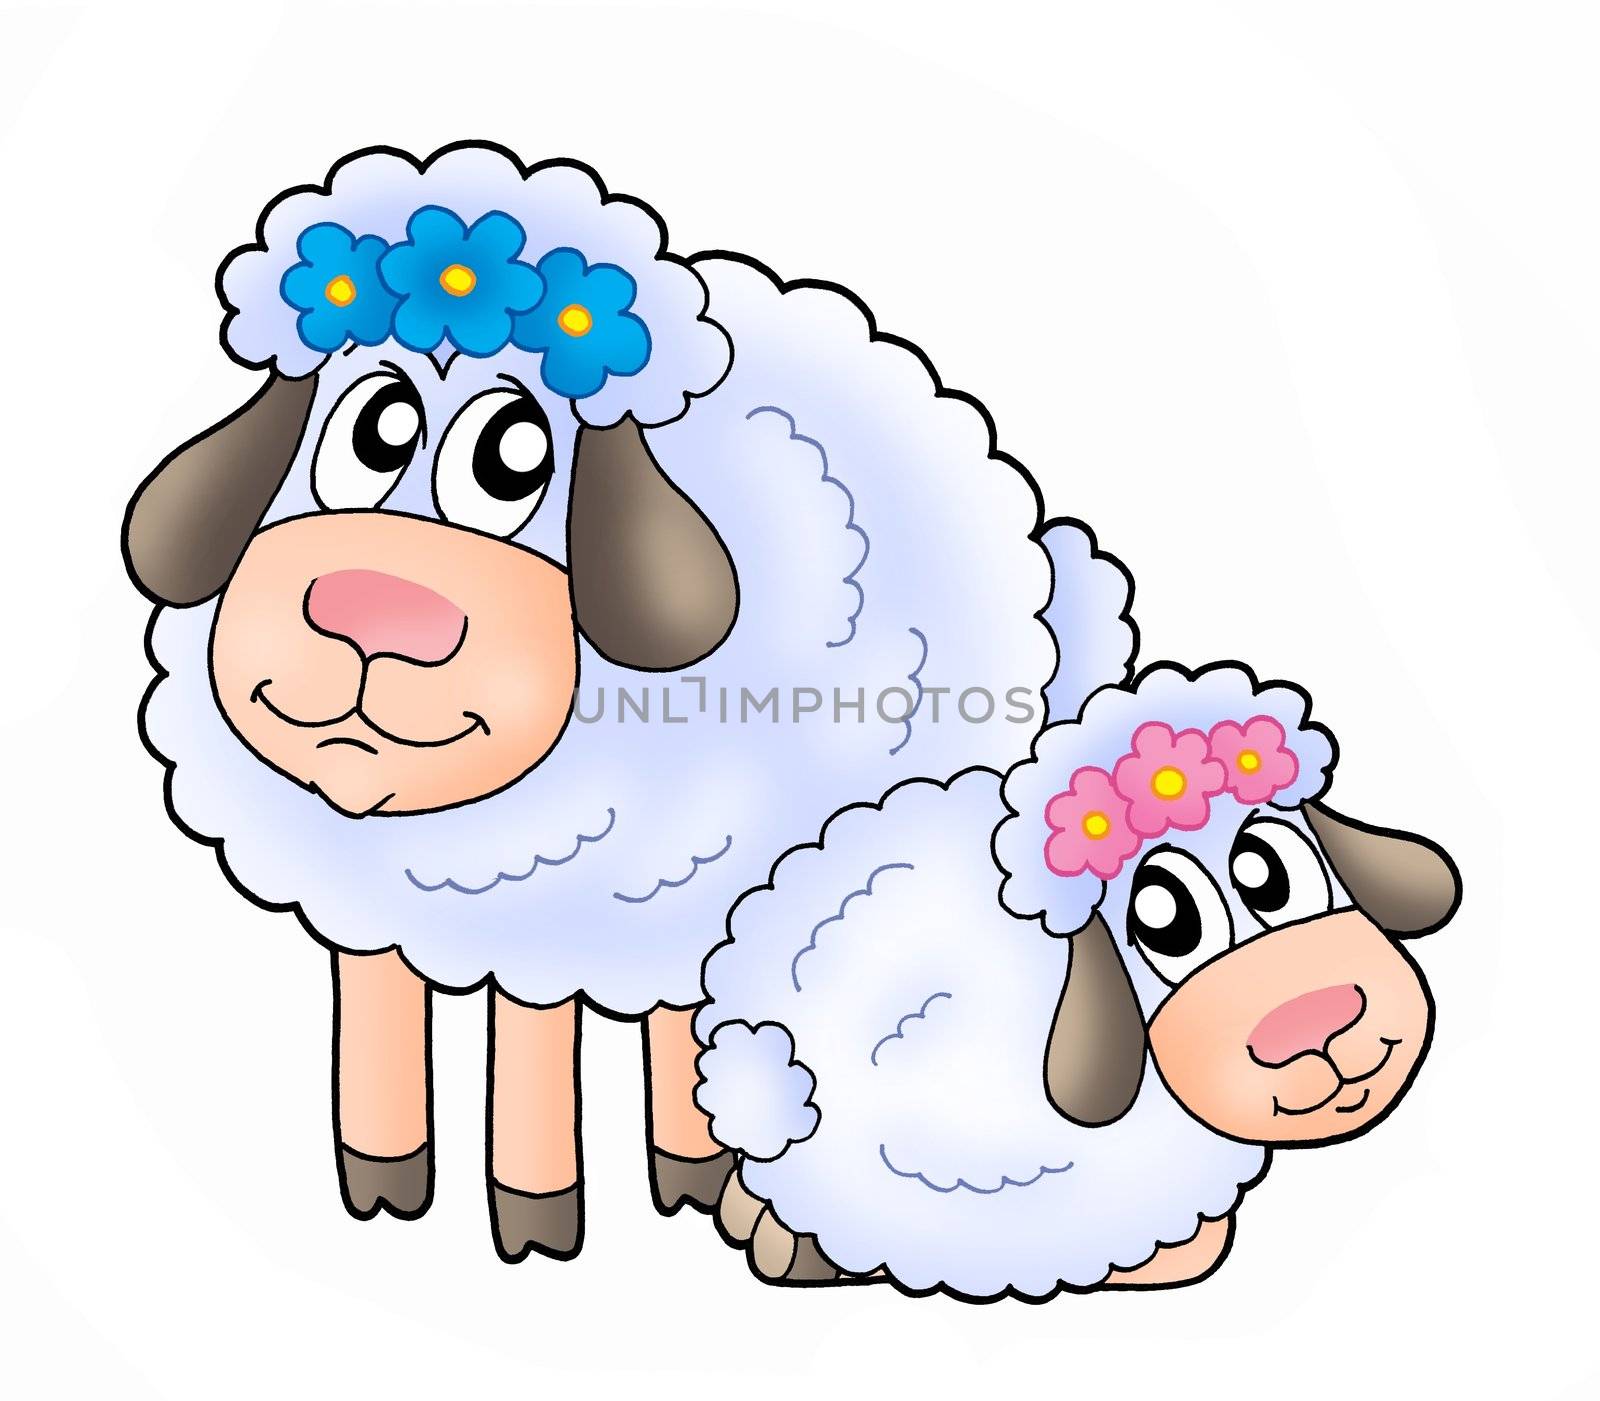 Color illustration of two white sheeps.